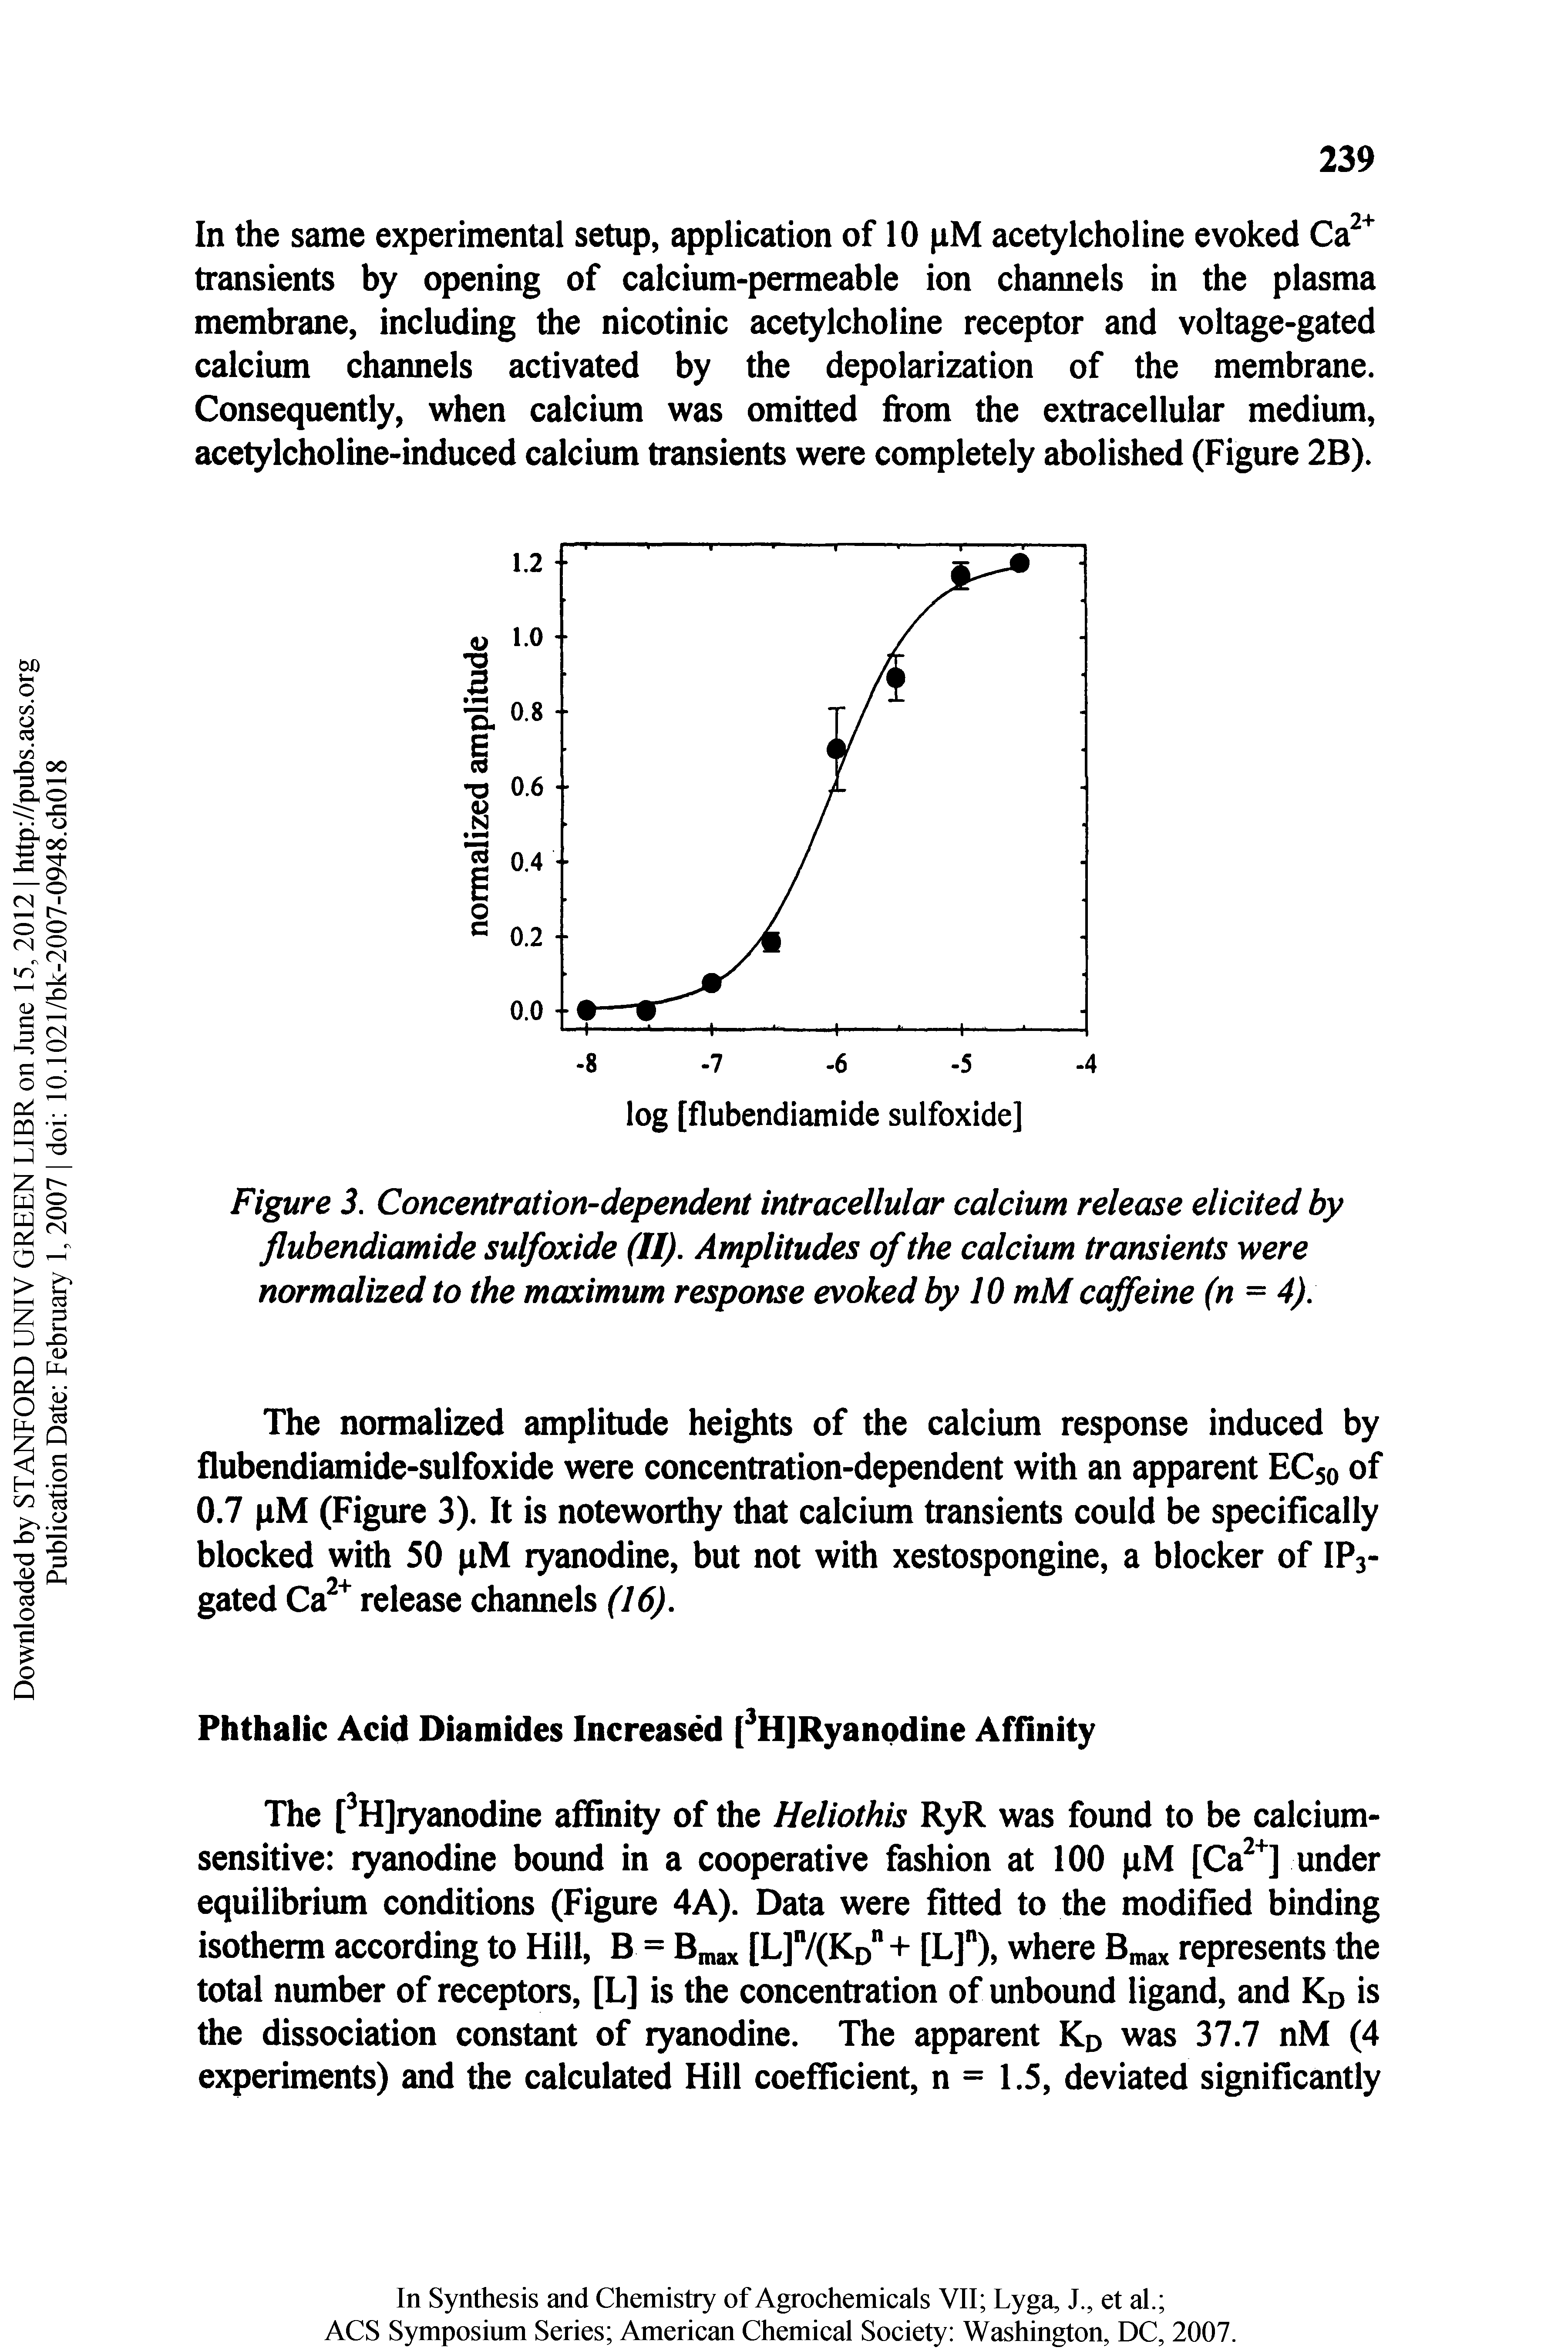 Figure 3. Concentration-dependent intracellular calcium release elicited by flubendiamide sulfoxide (II). Amplitudes of the calcium transients were normalized to the maximum response evoked by 10 mM caffeine (n = 4).